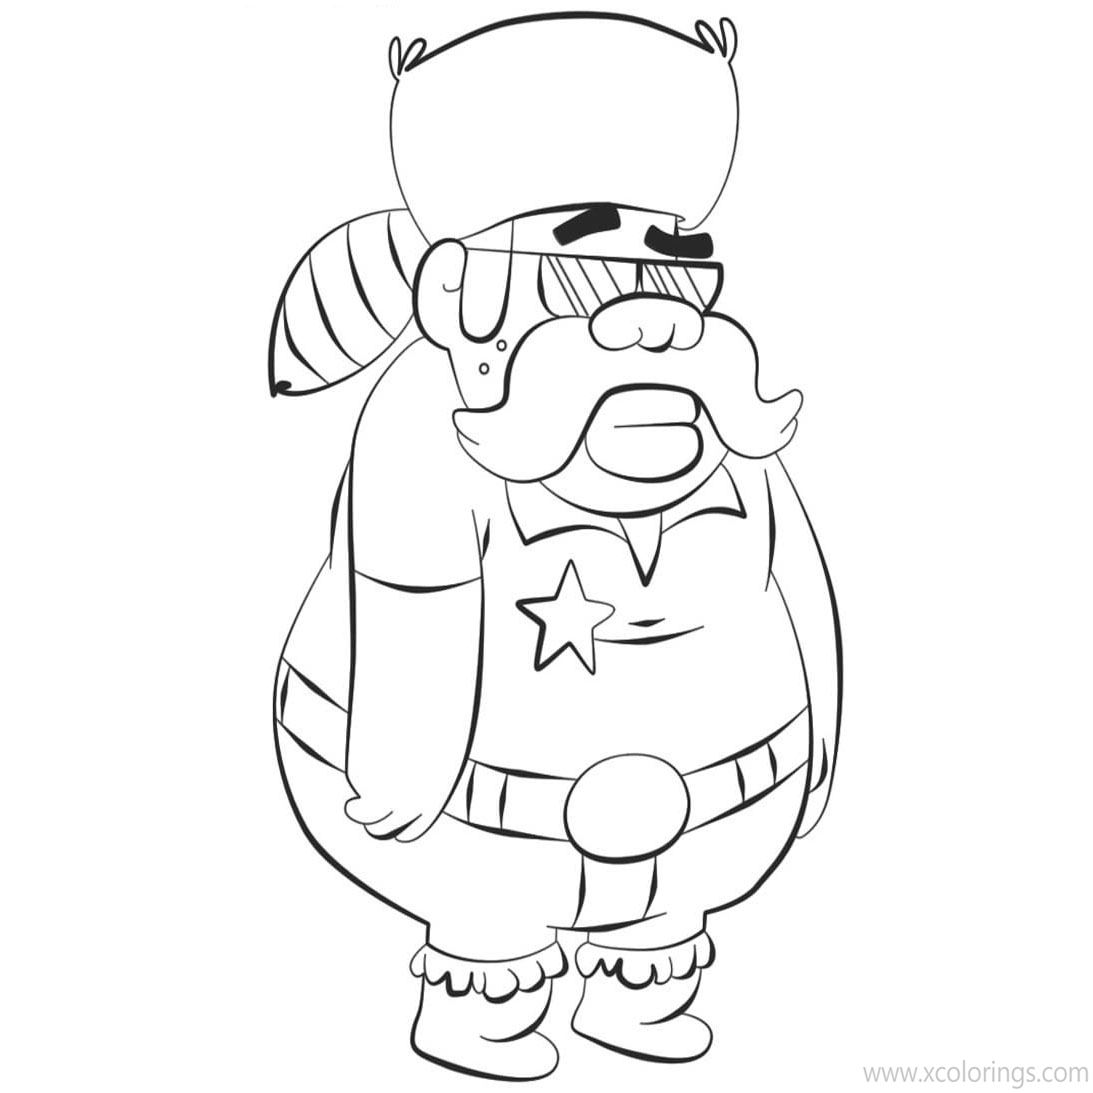 Free Gravity Falls Coloring Pages Sheriff printable